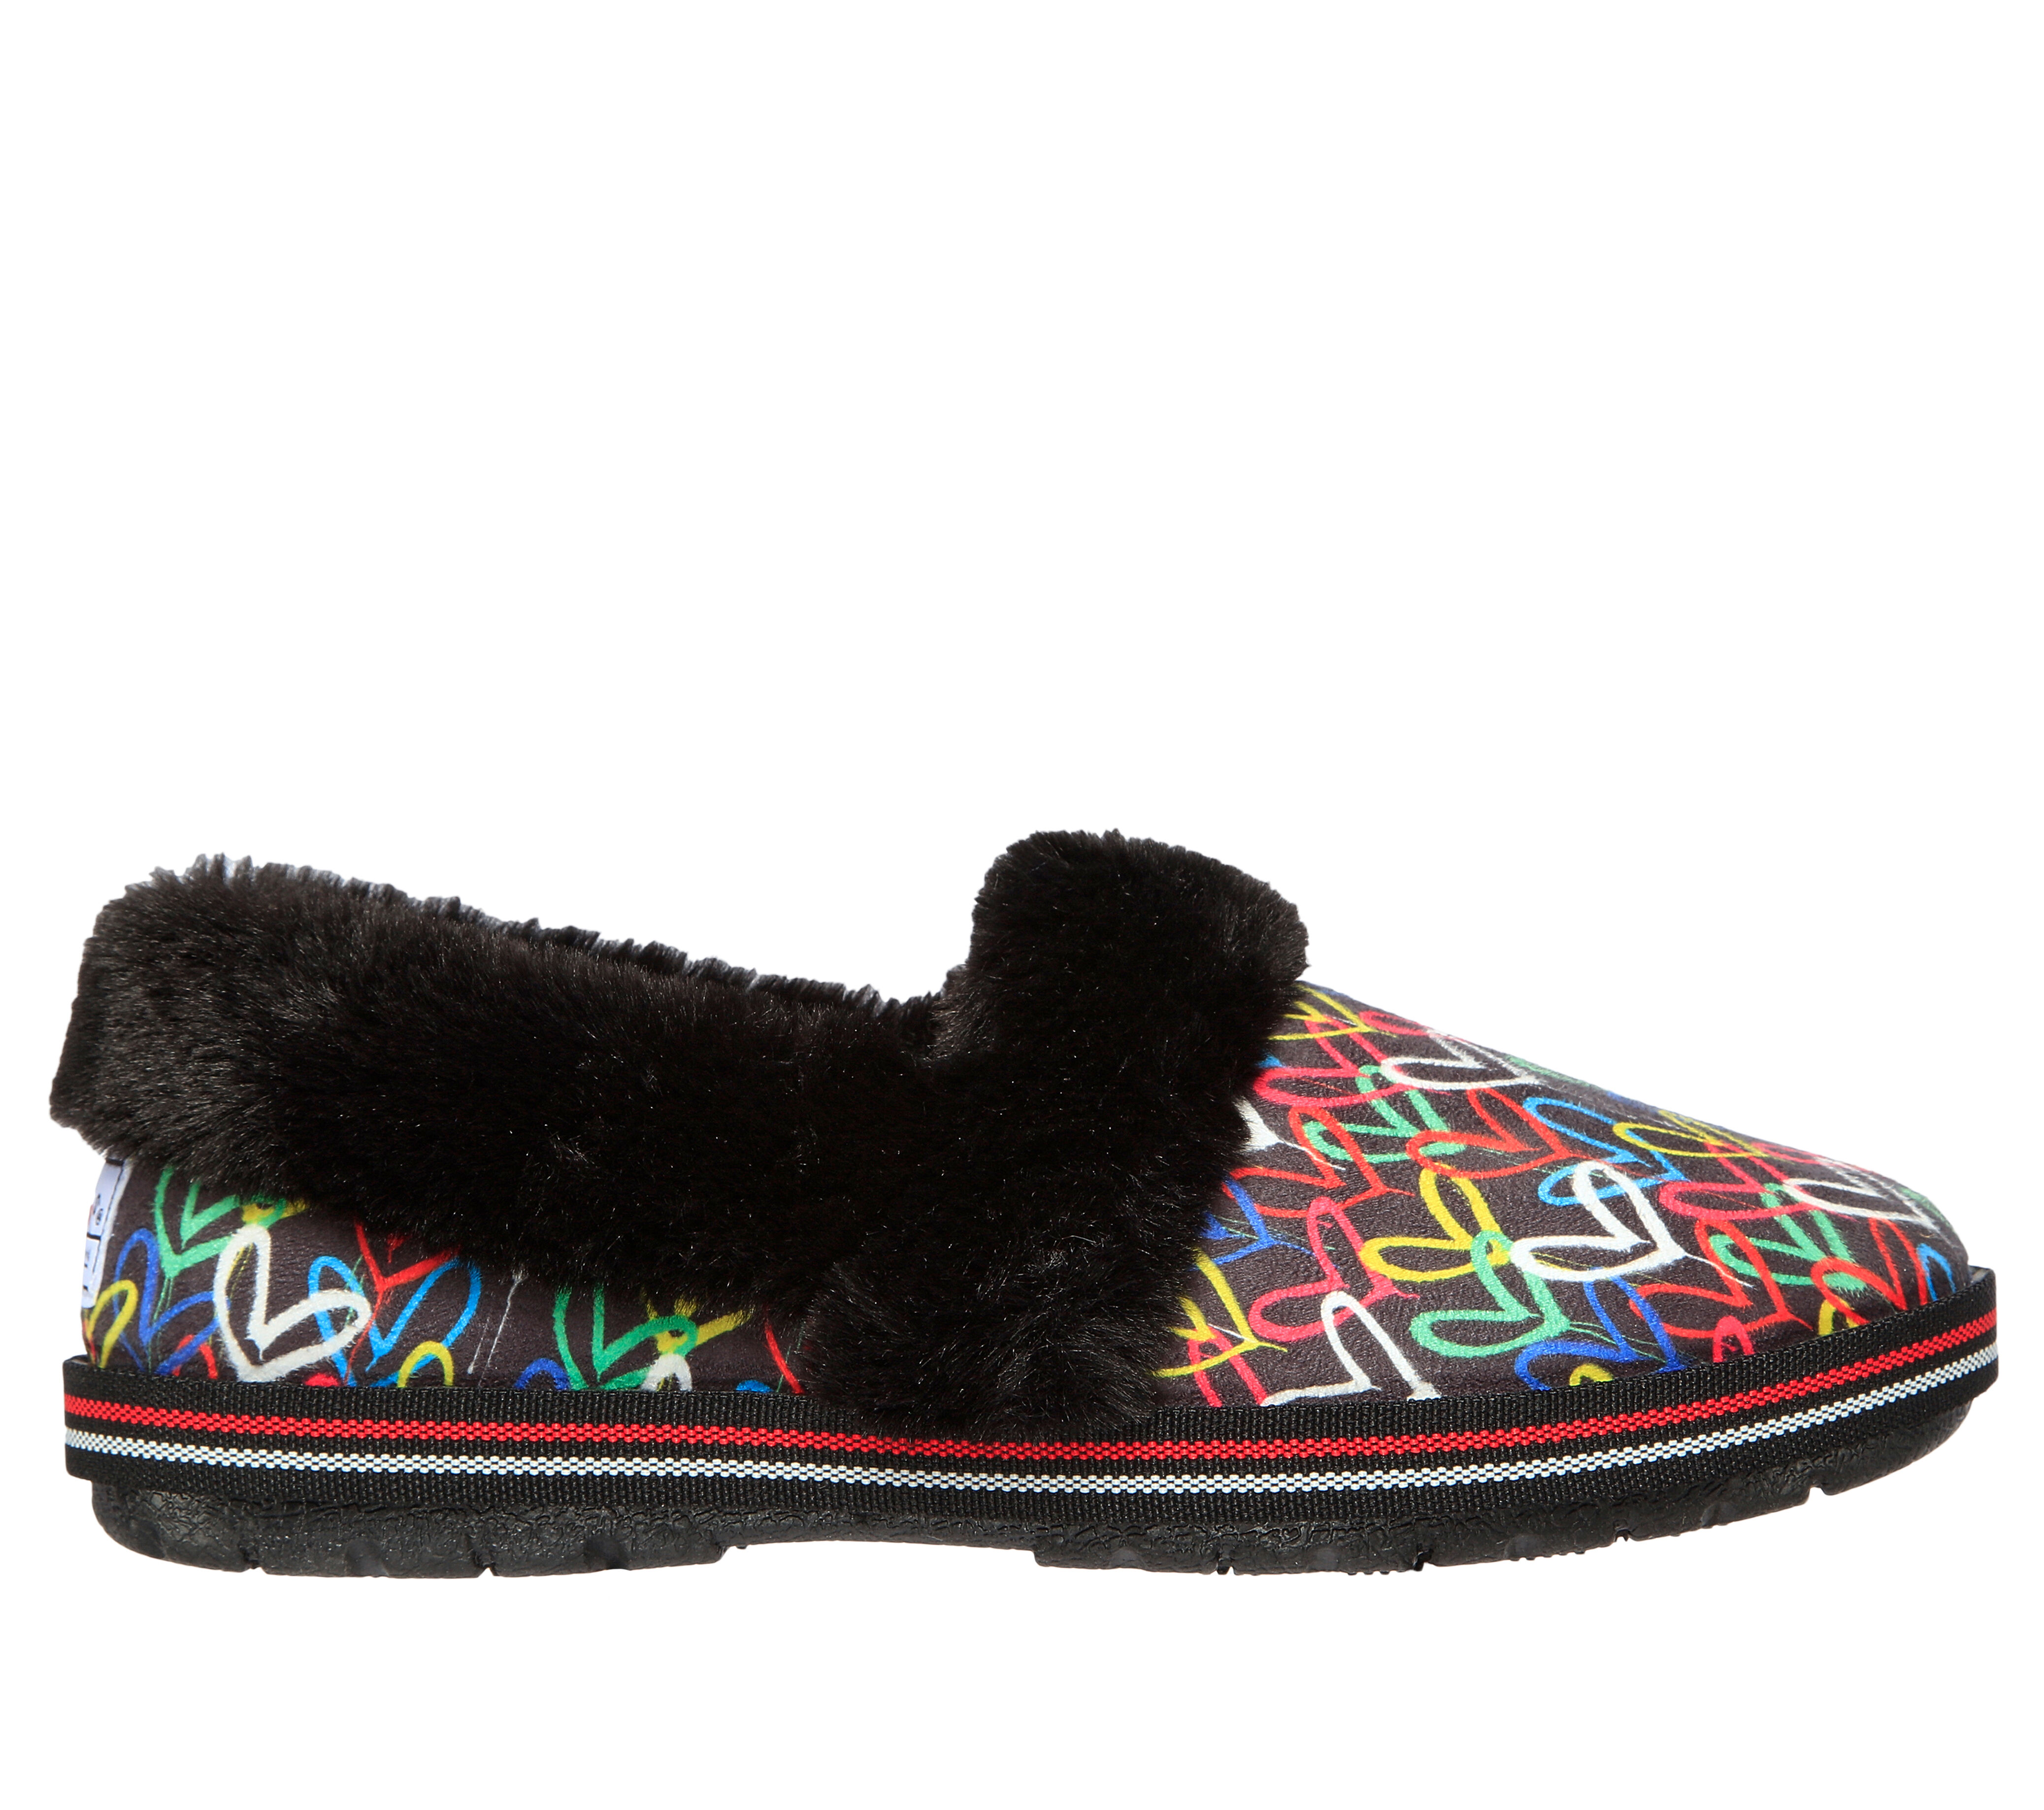 skechers slippers womens shoes